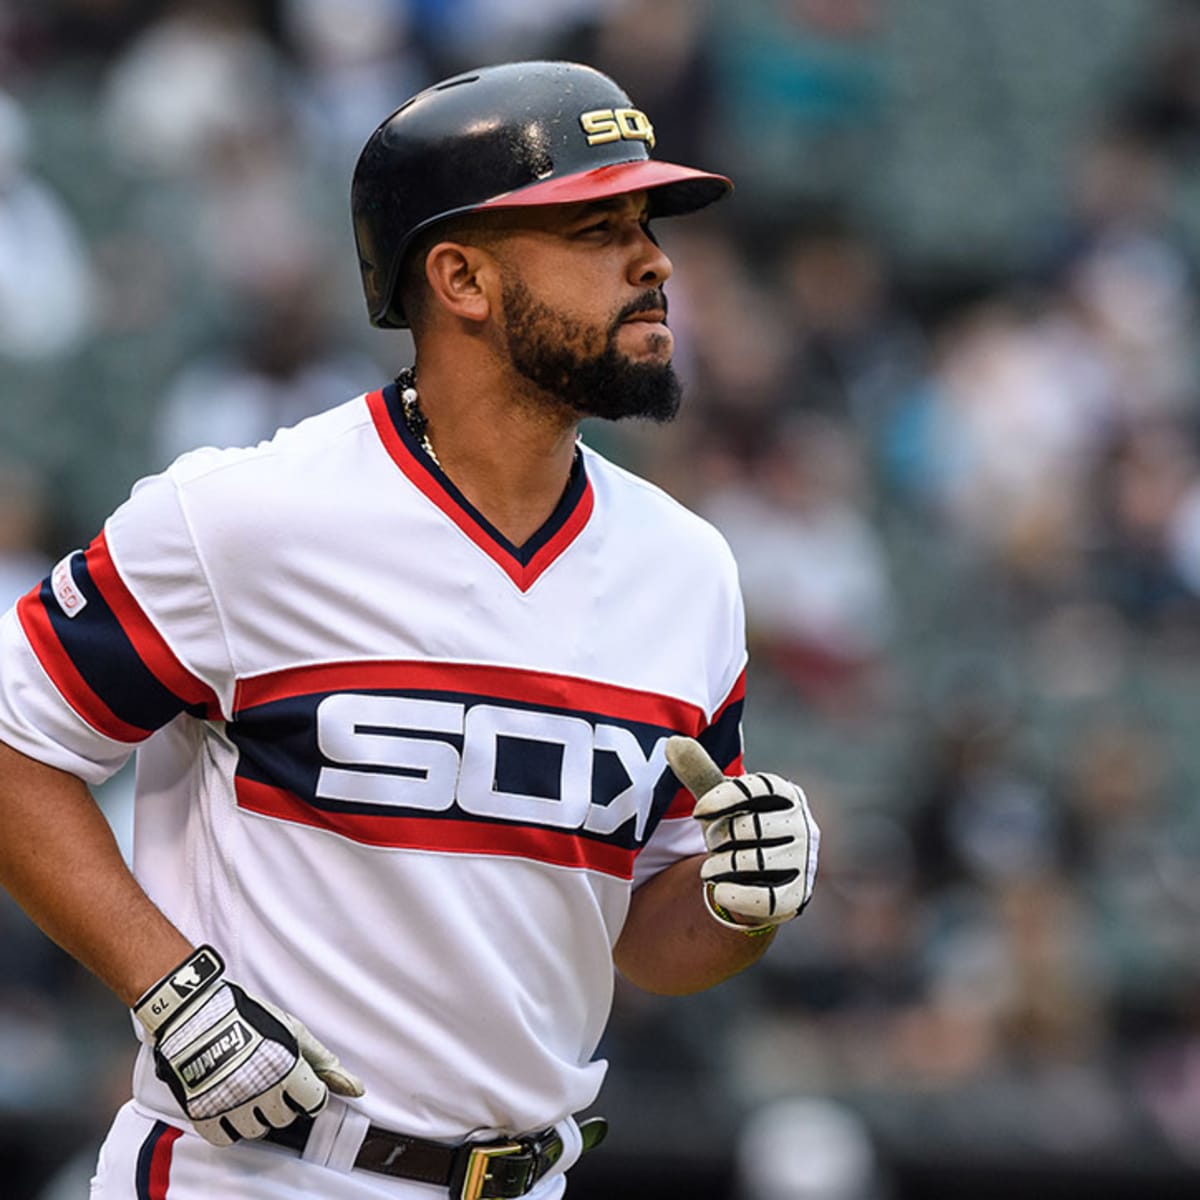 Jose Abreu contract: Signs three-year, $50M deal with White Sox